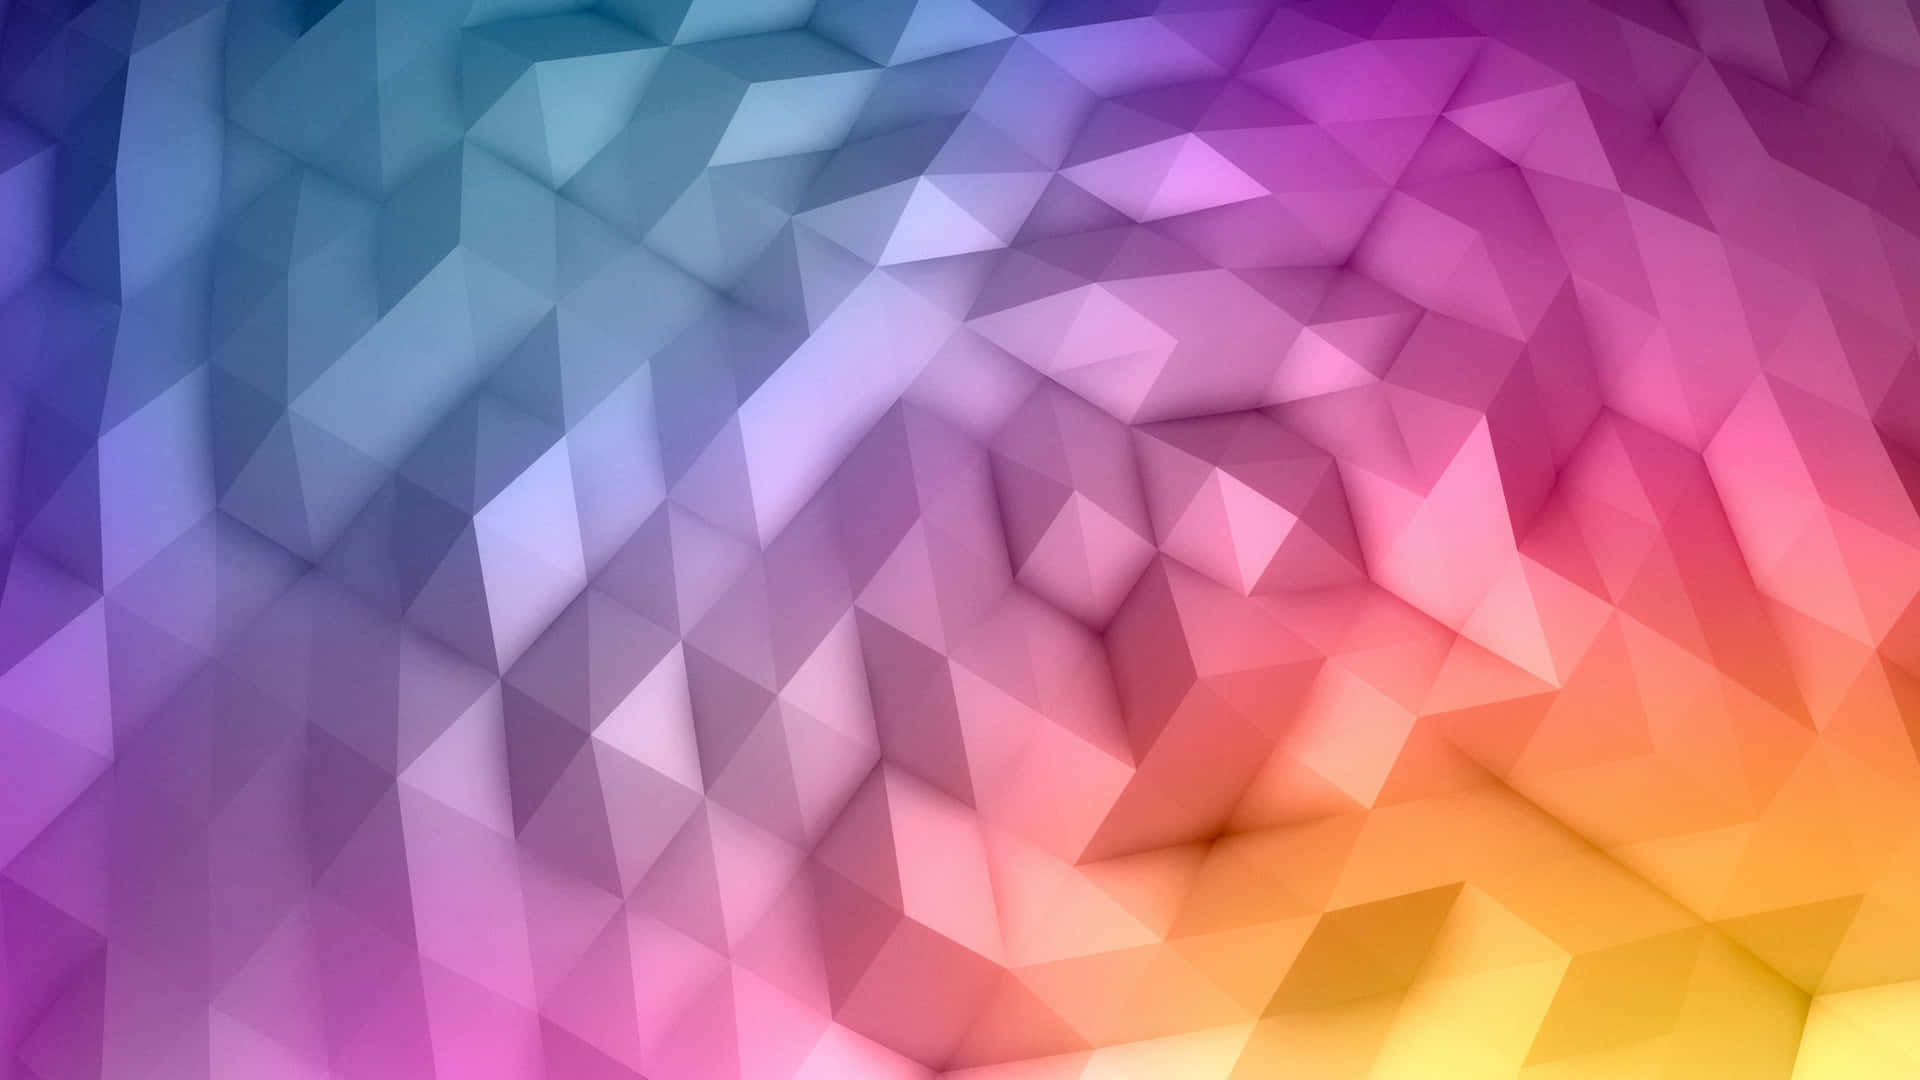 "Explore the depths of creativity with this Polygon Background"